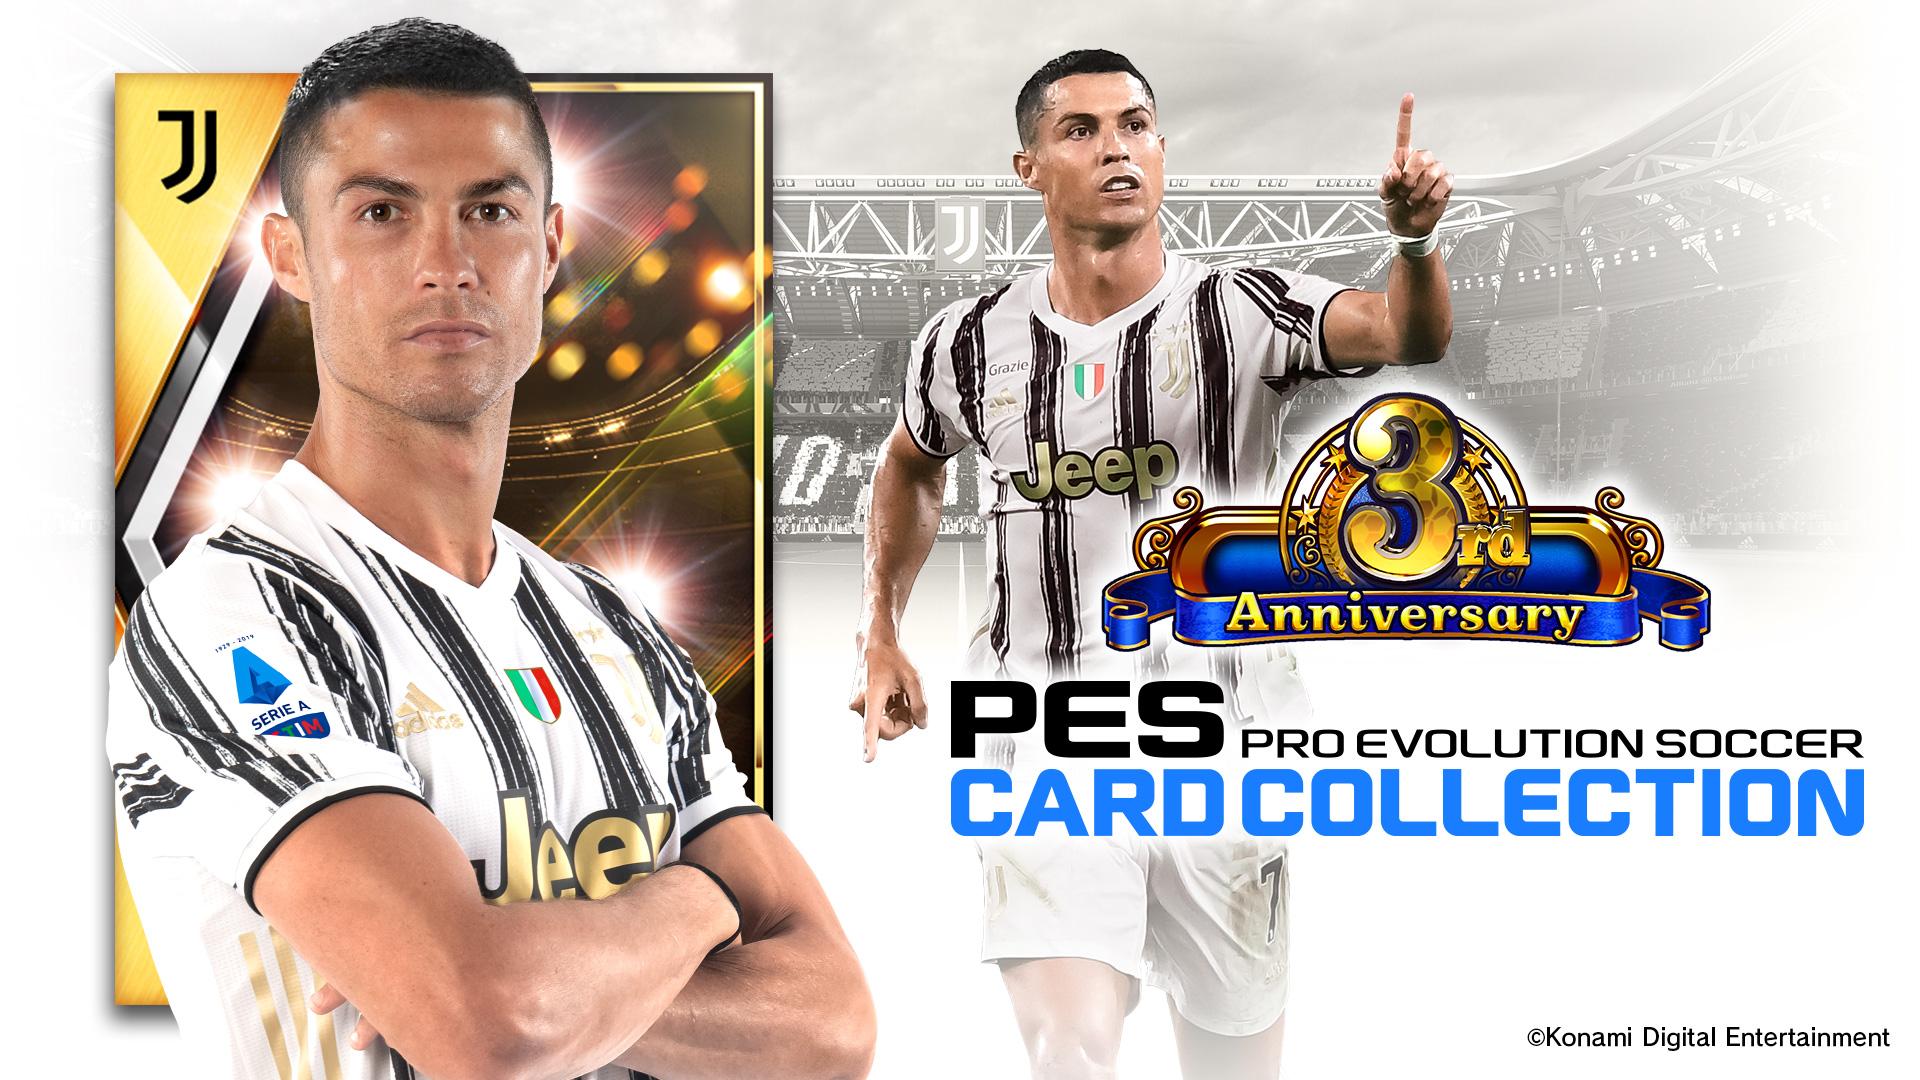 PES CARD COLLECTION for Android - APK Download